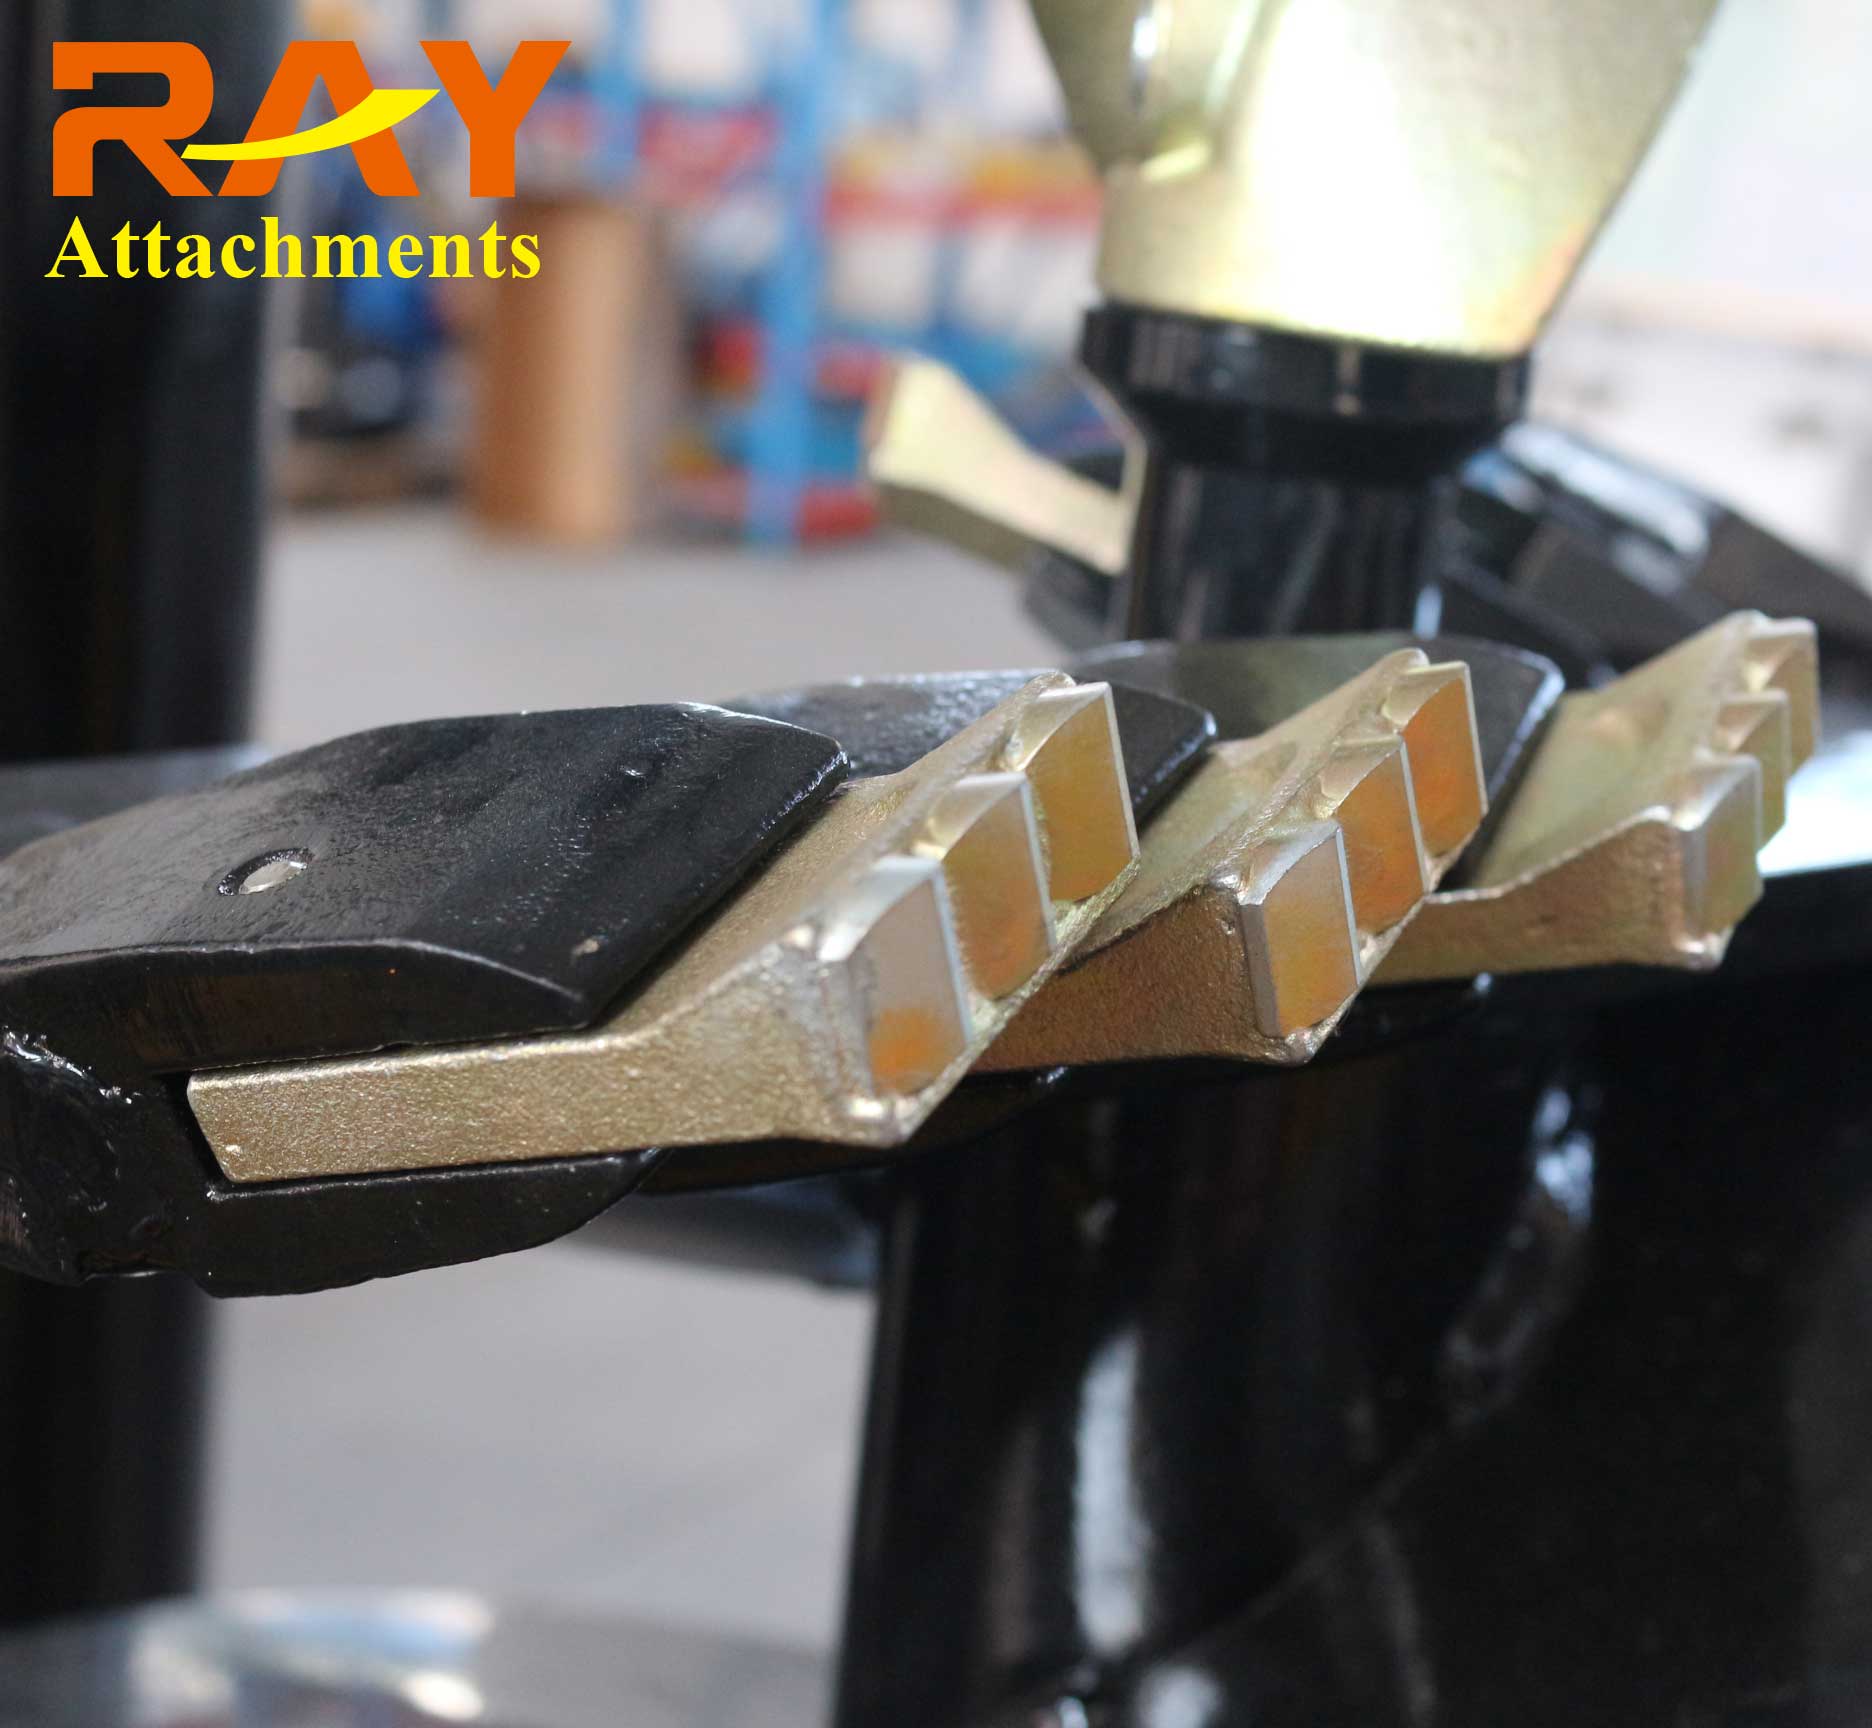 REA7000 model Earth Auger for excavator attachments